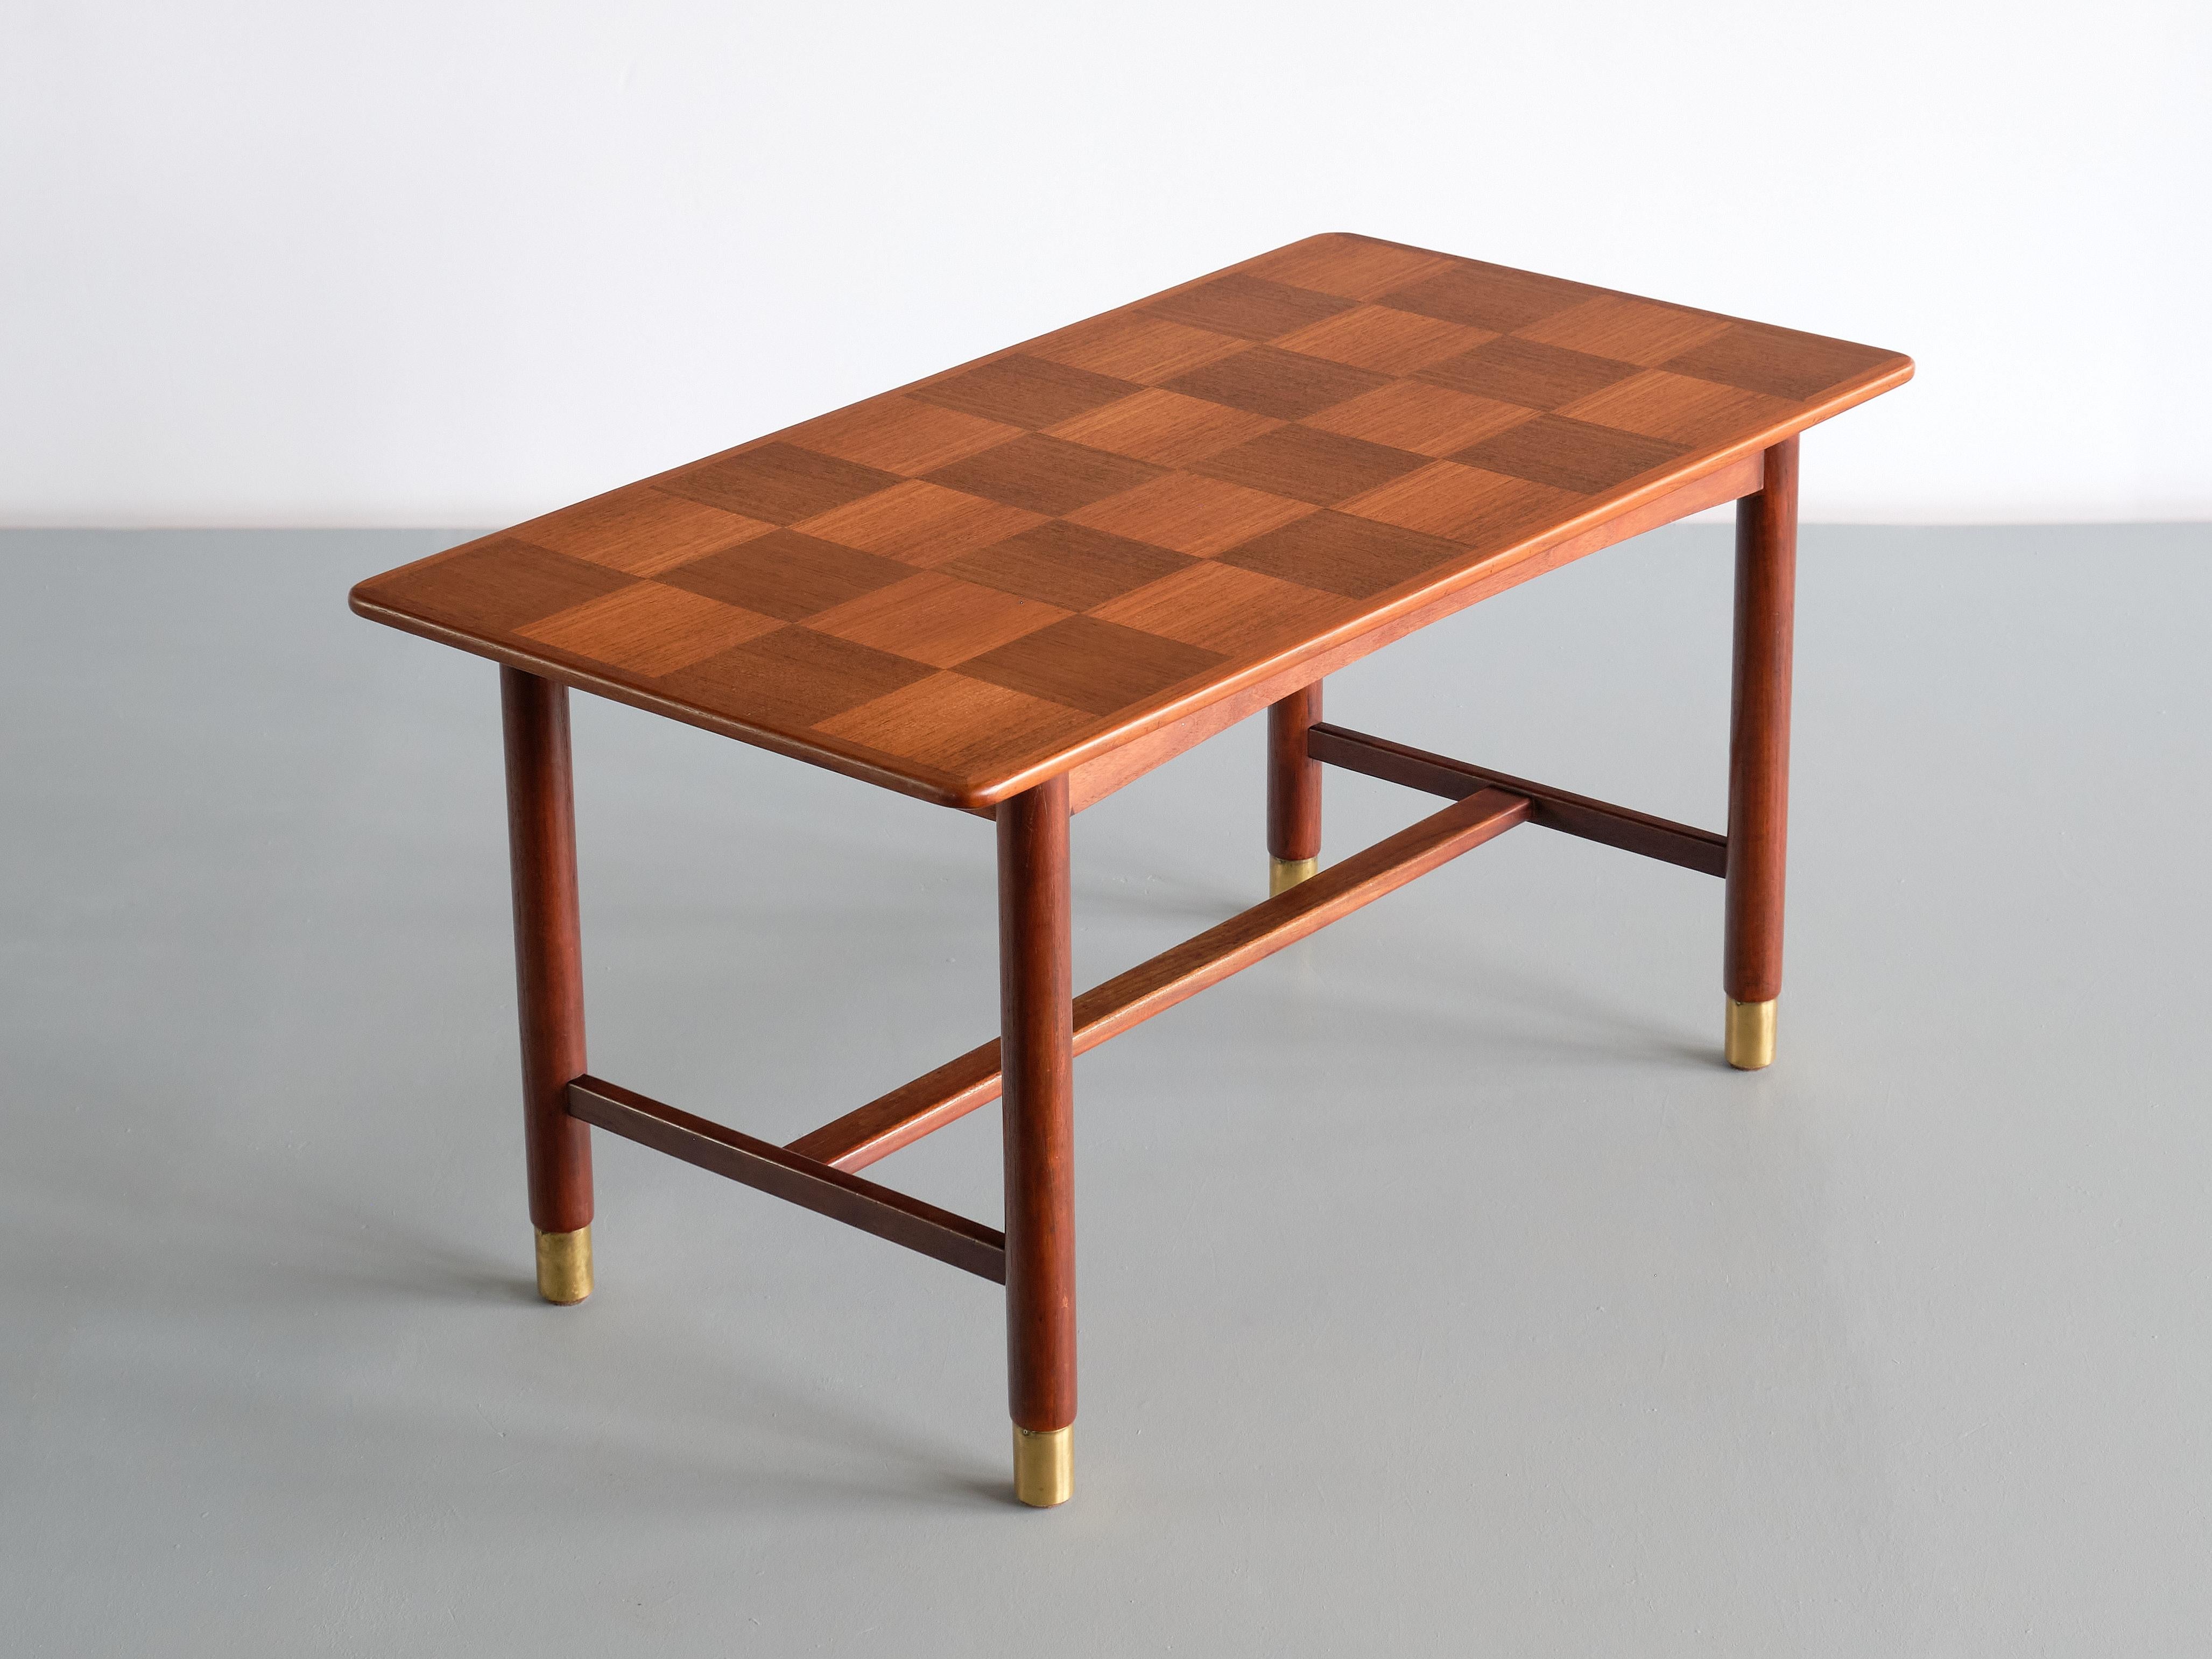 Carl Axel Acking Coffee Table in Teak and Brass, SMF Bodafors, Sweden, 1950s For Sale 5